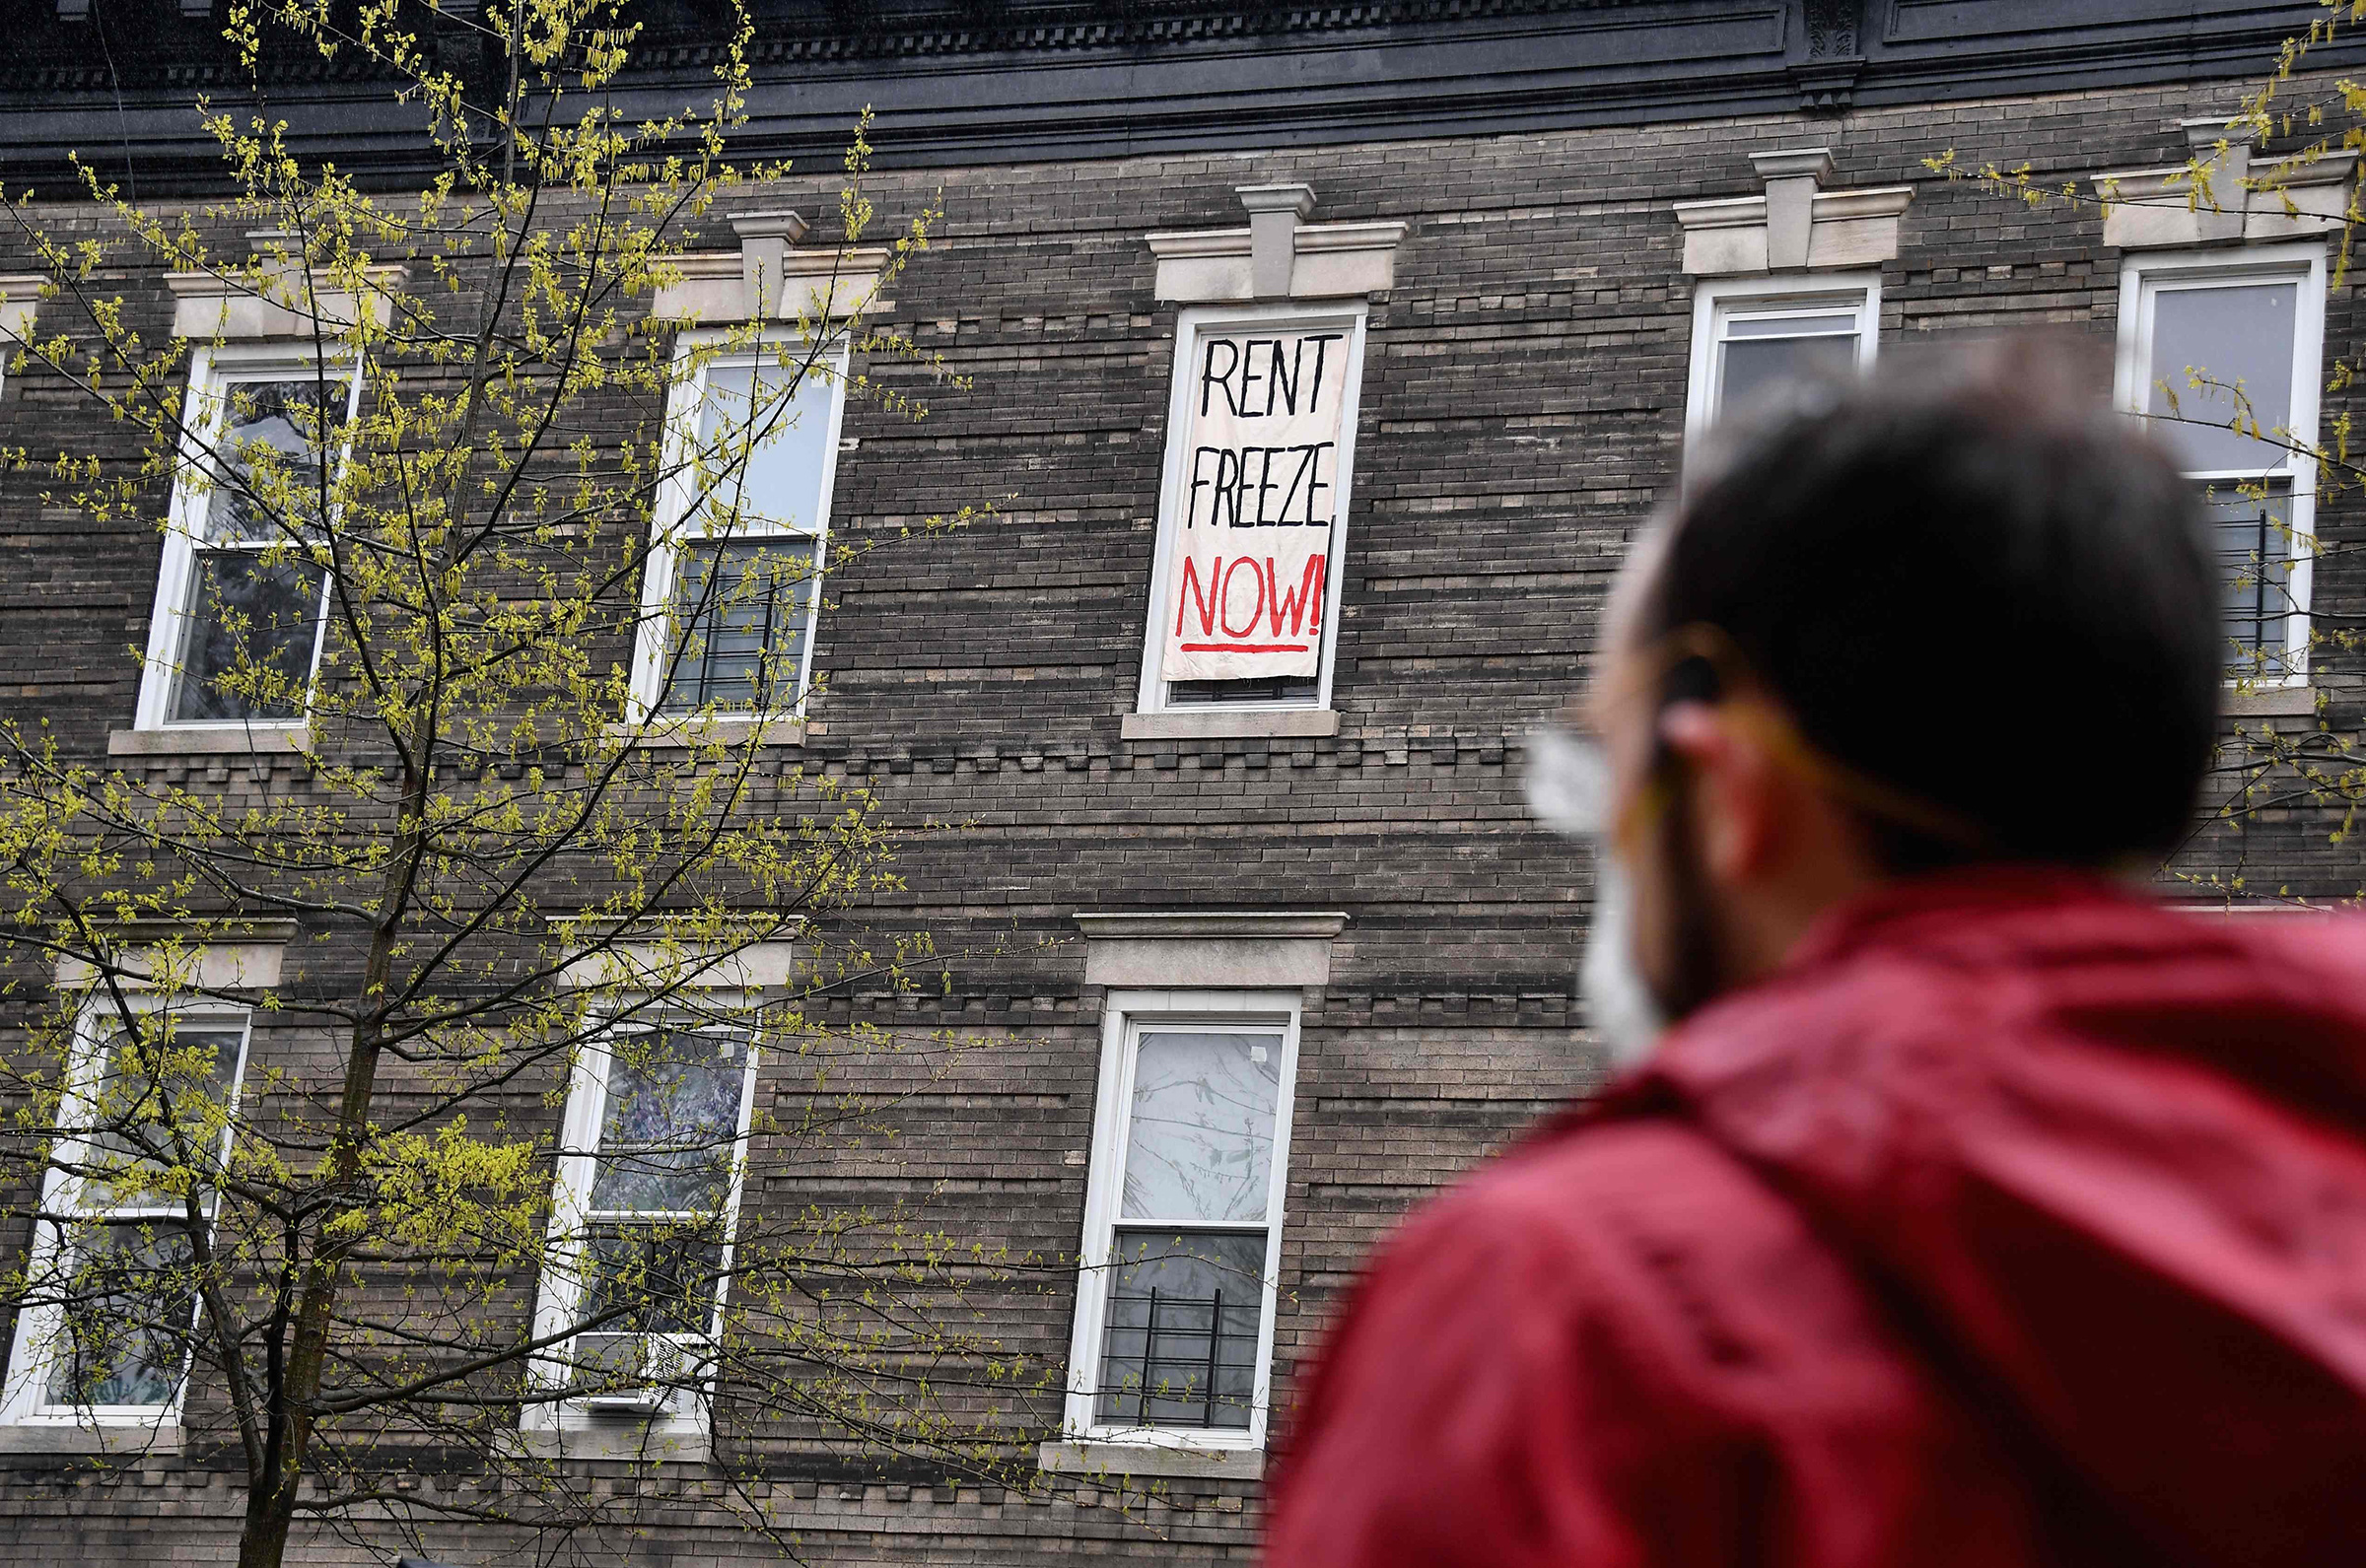 A Crown Heights building tenant stages a rent strike on May 1 in New York City